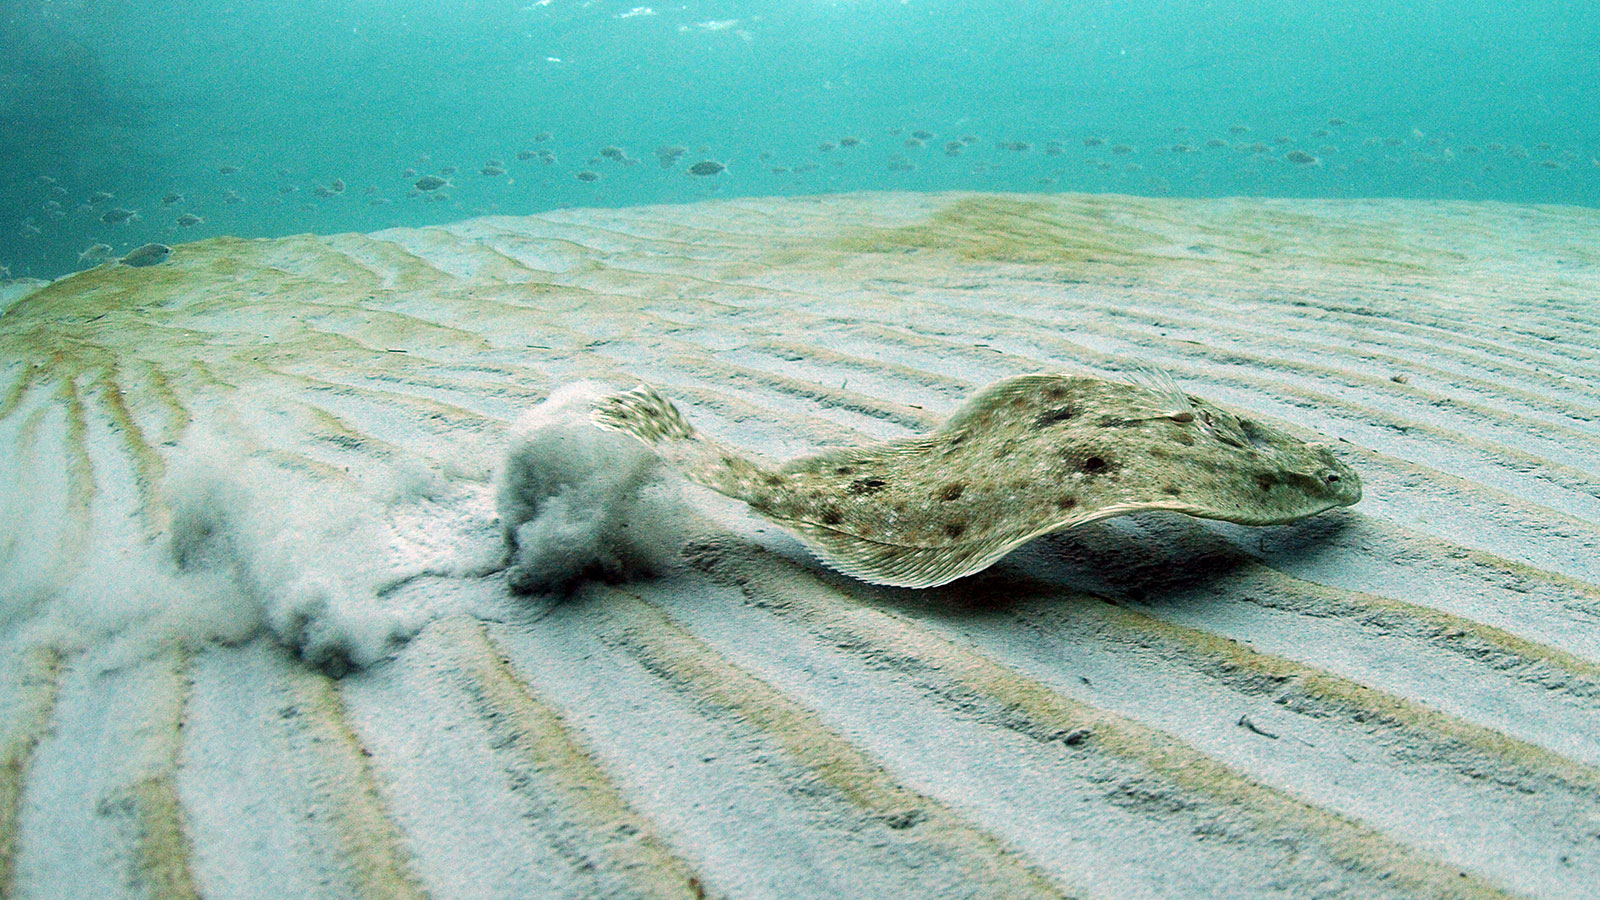 A flounder swimming just like a normal fish would swim.